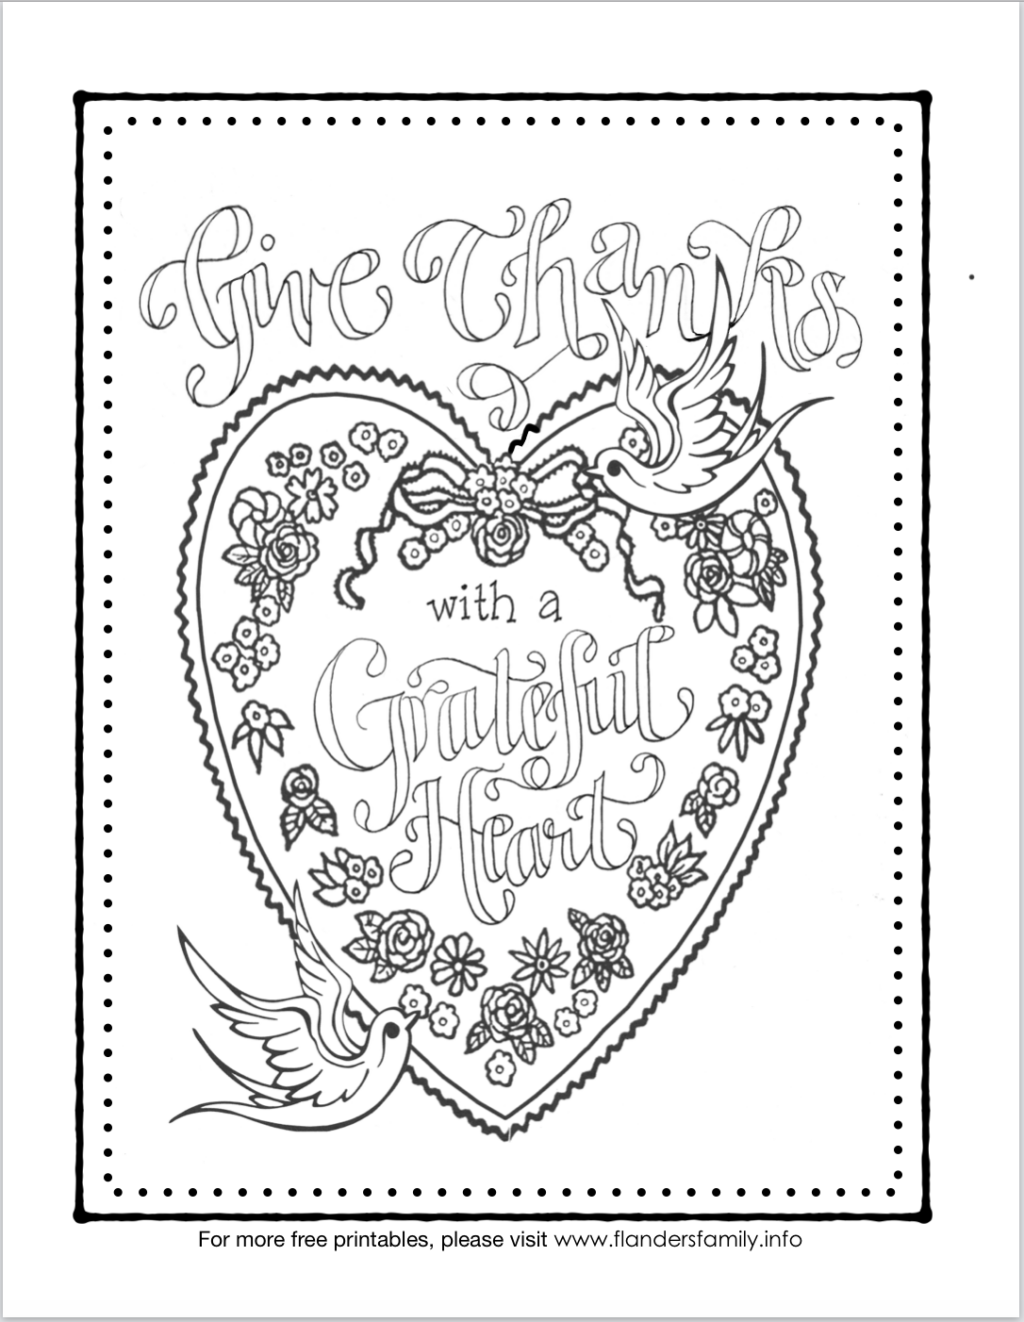 A Grateful Heart Coloring Page